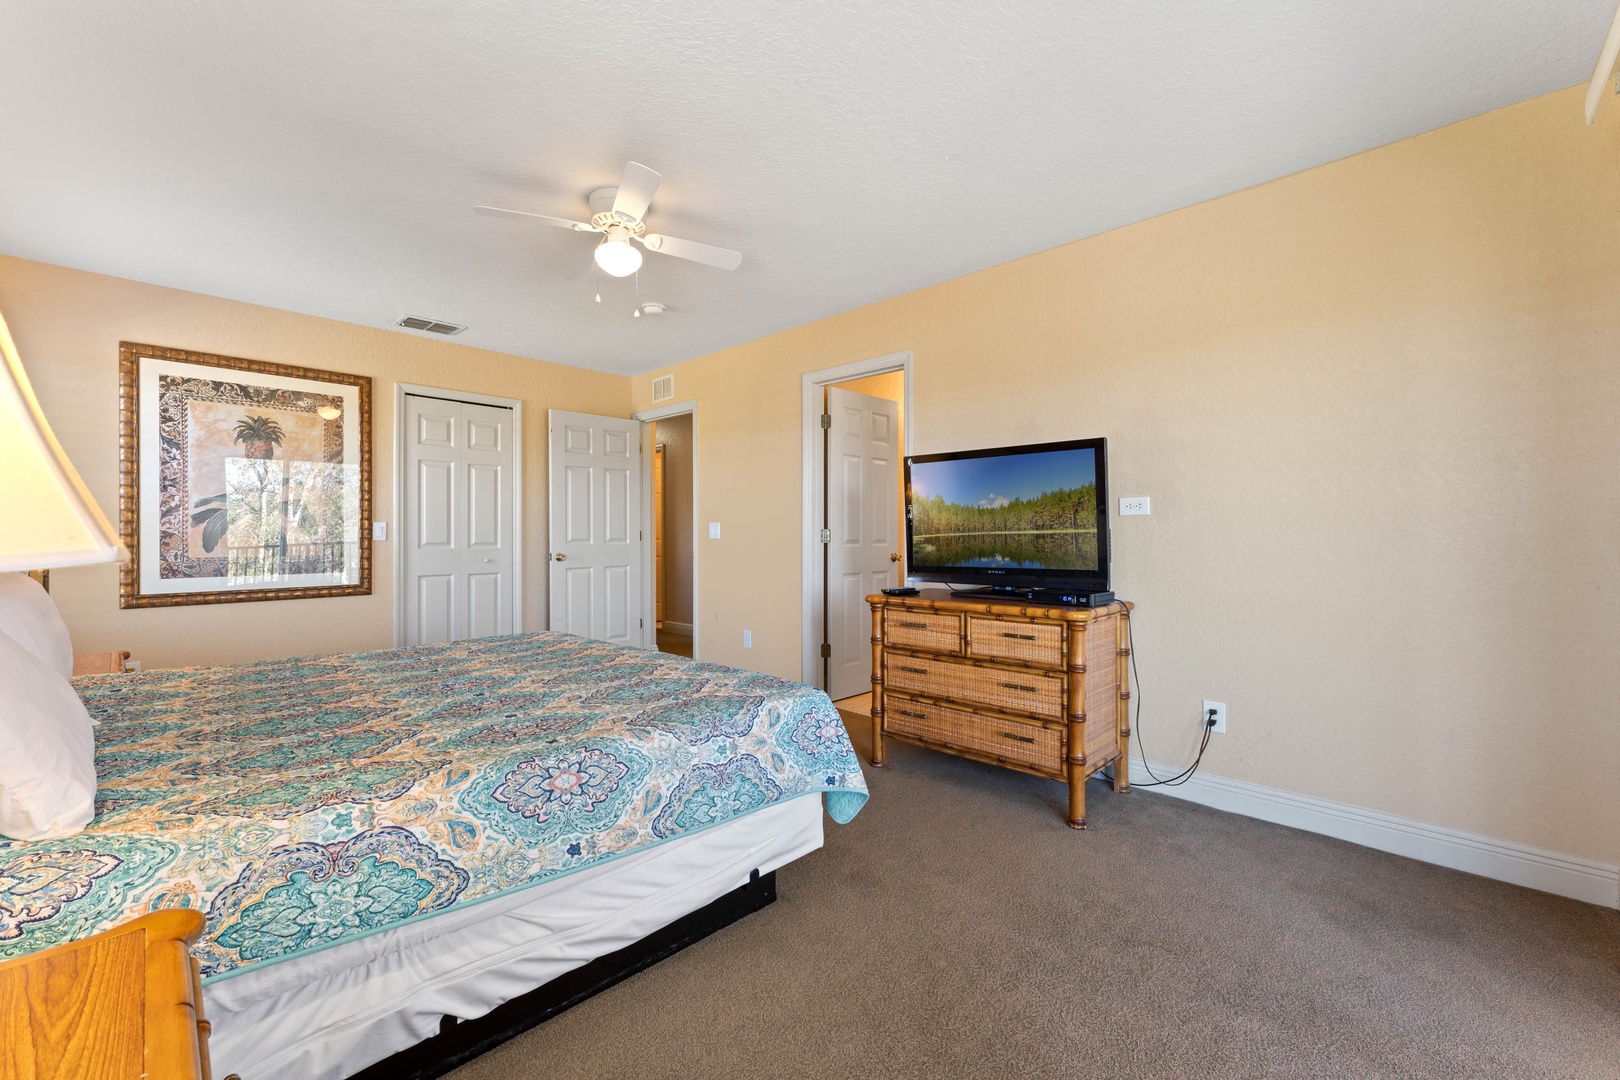 This 2nd floor king suite boasts a private ensuite, TV, & balcony access